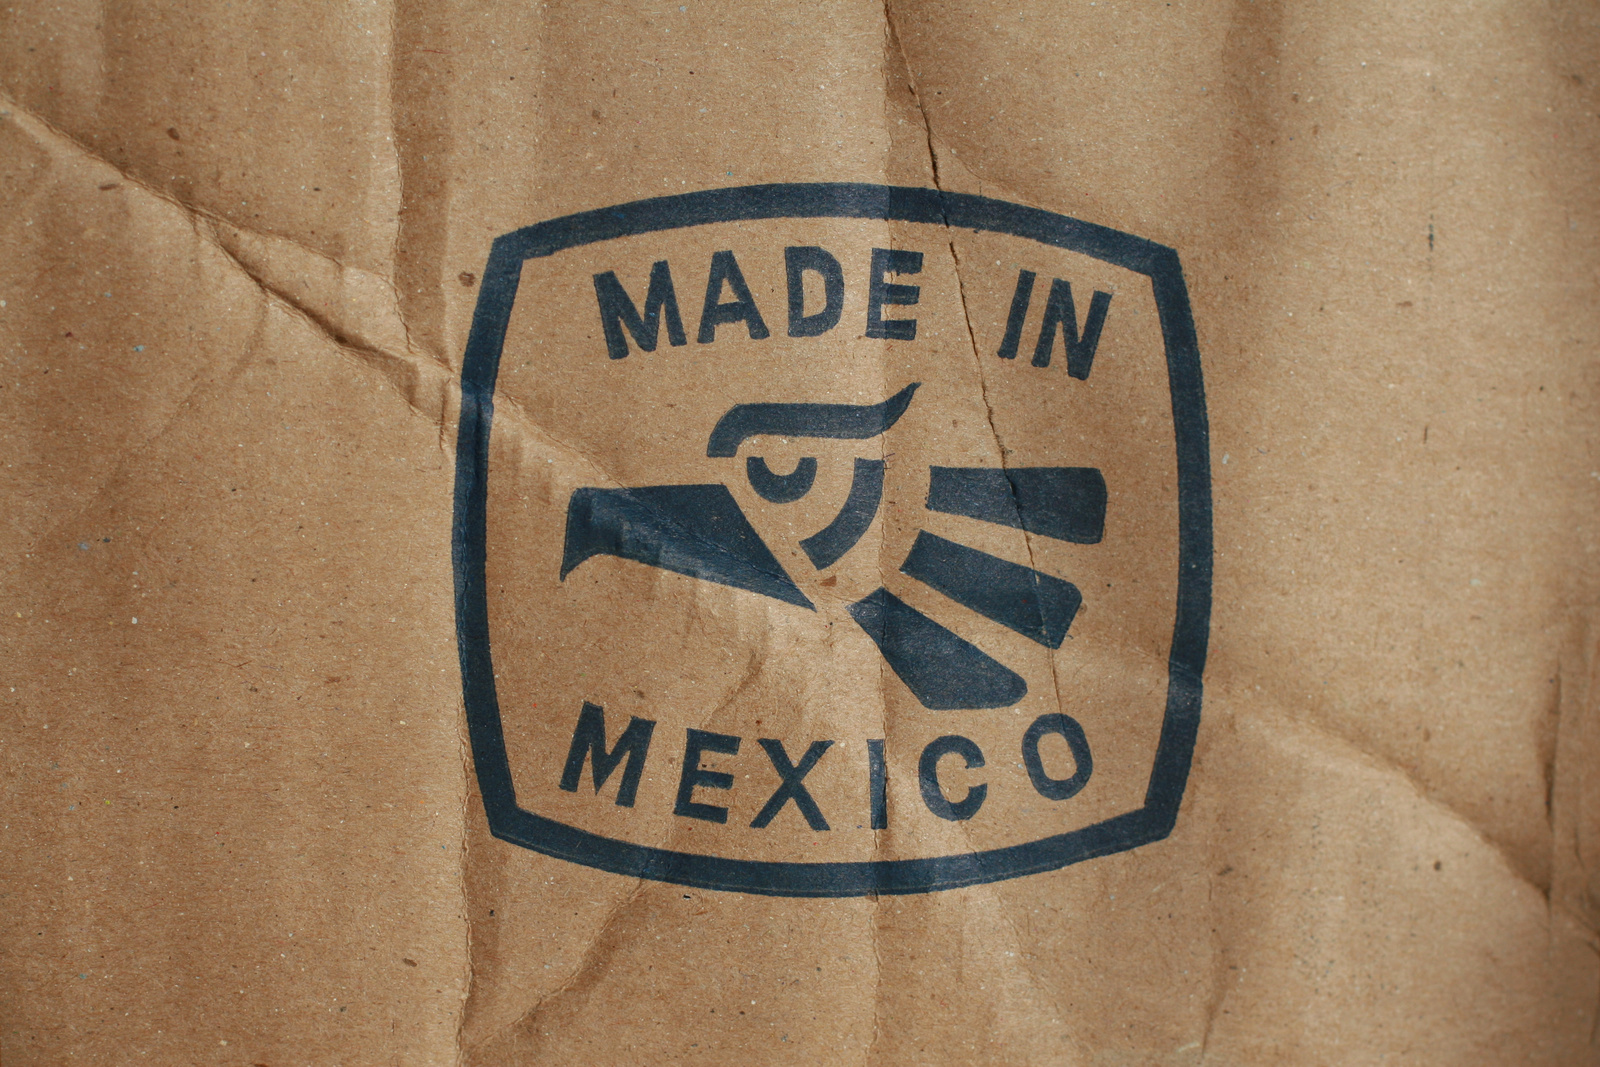 Made in Mexico